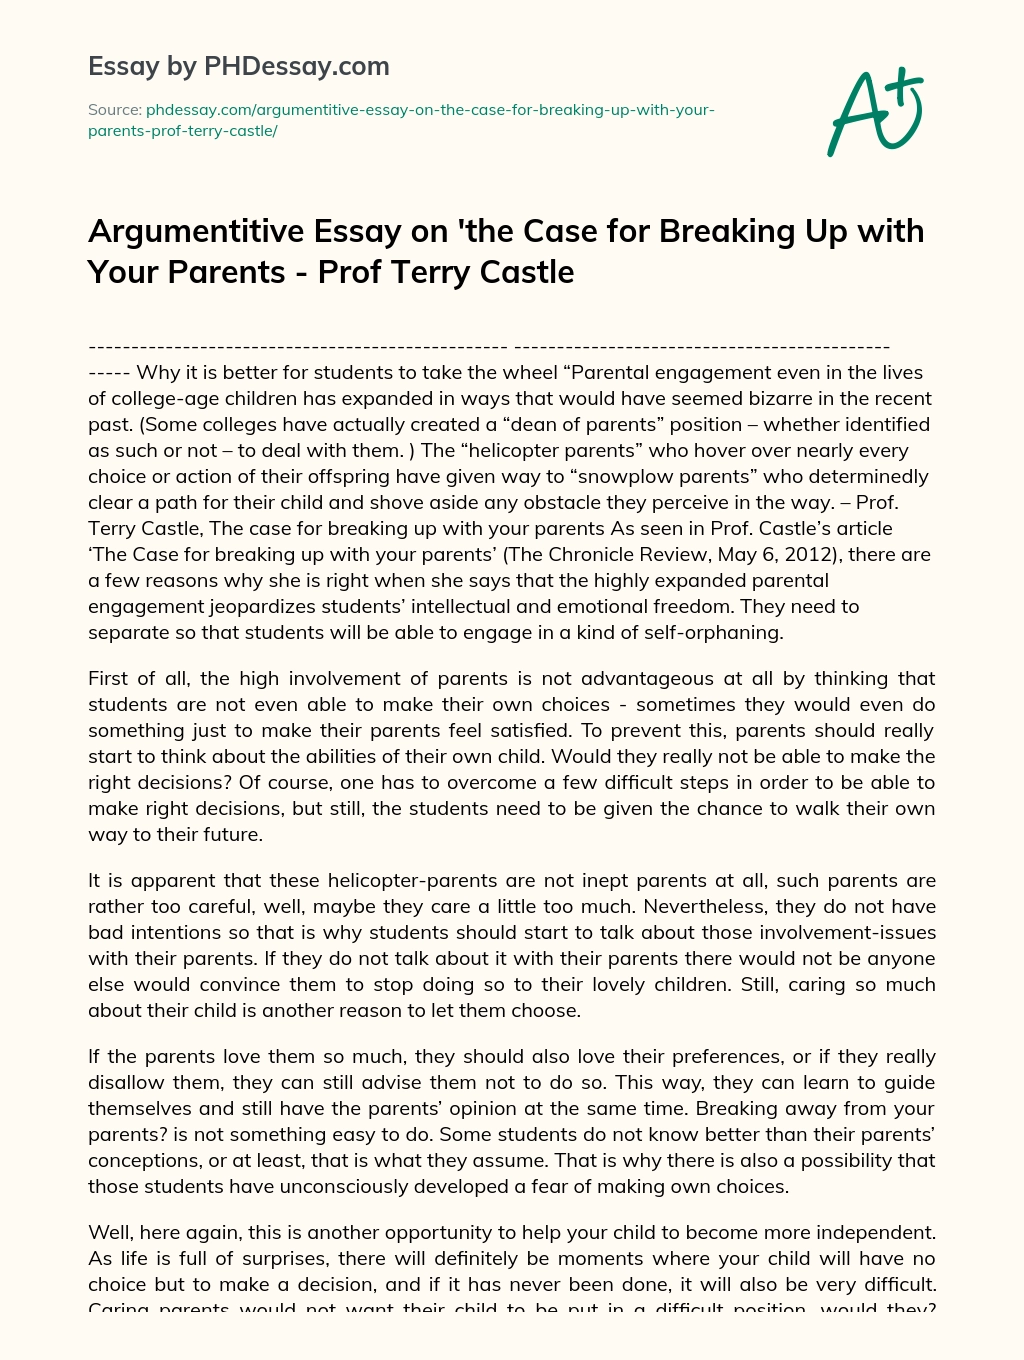 Argumentitive Essay on ‘the Case for Breaking Up with Your Parents – Prof Terry Castle essay